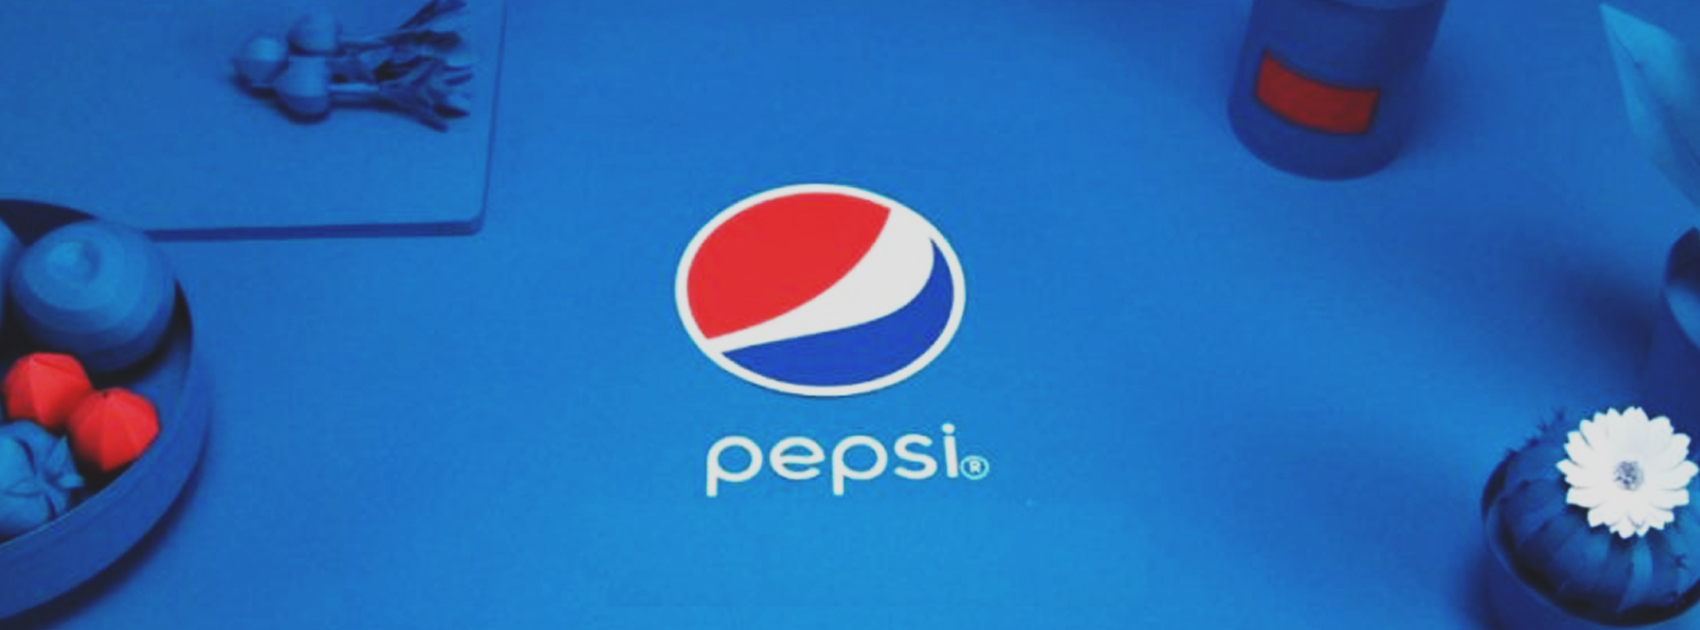 Pepsico Unknown Facts,Startup Stories,2019 Best Motivational Stories,Interesting Facts about Pepsico,Pepsico Facts 2019,Pepsico Amazing Facts,Important Facts about Pepsico,Real Facts about Pepsi,Pepsi Facts and History,Pepsico Latest News